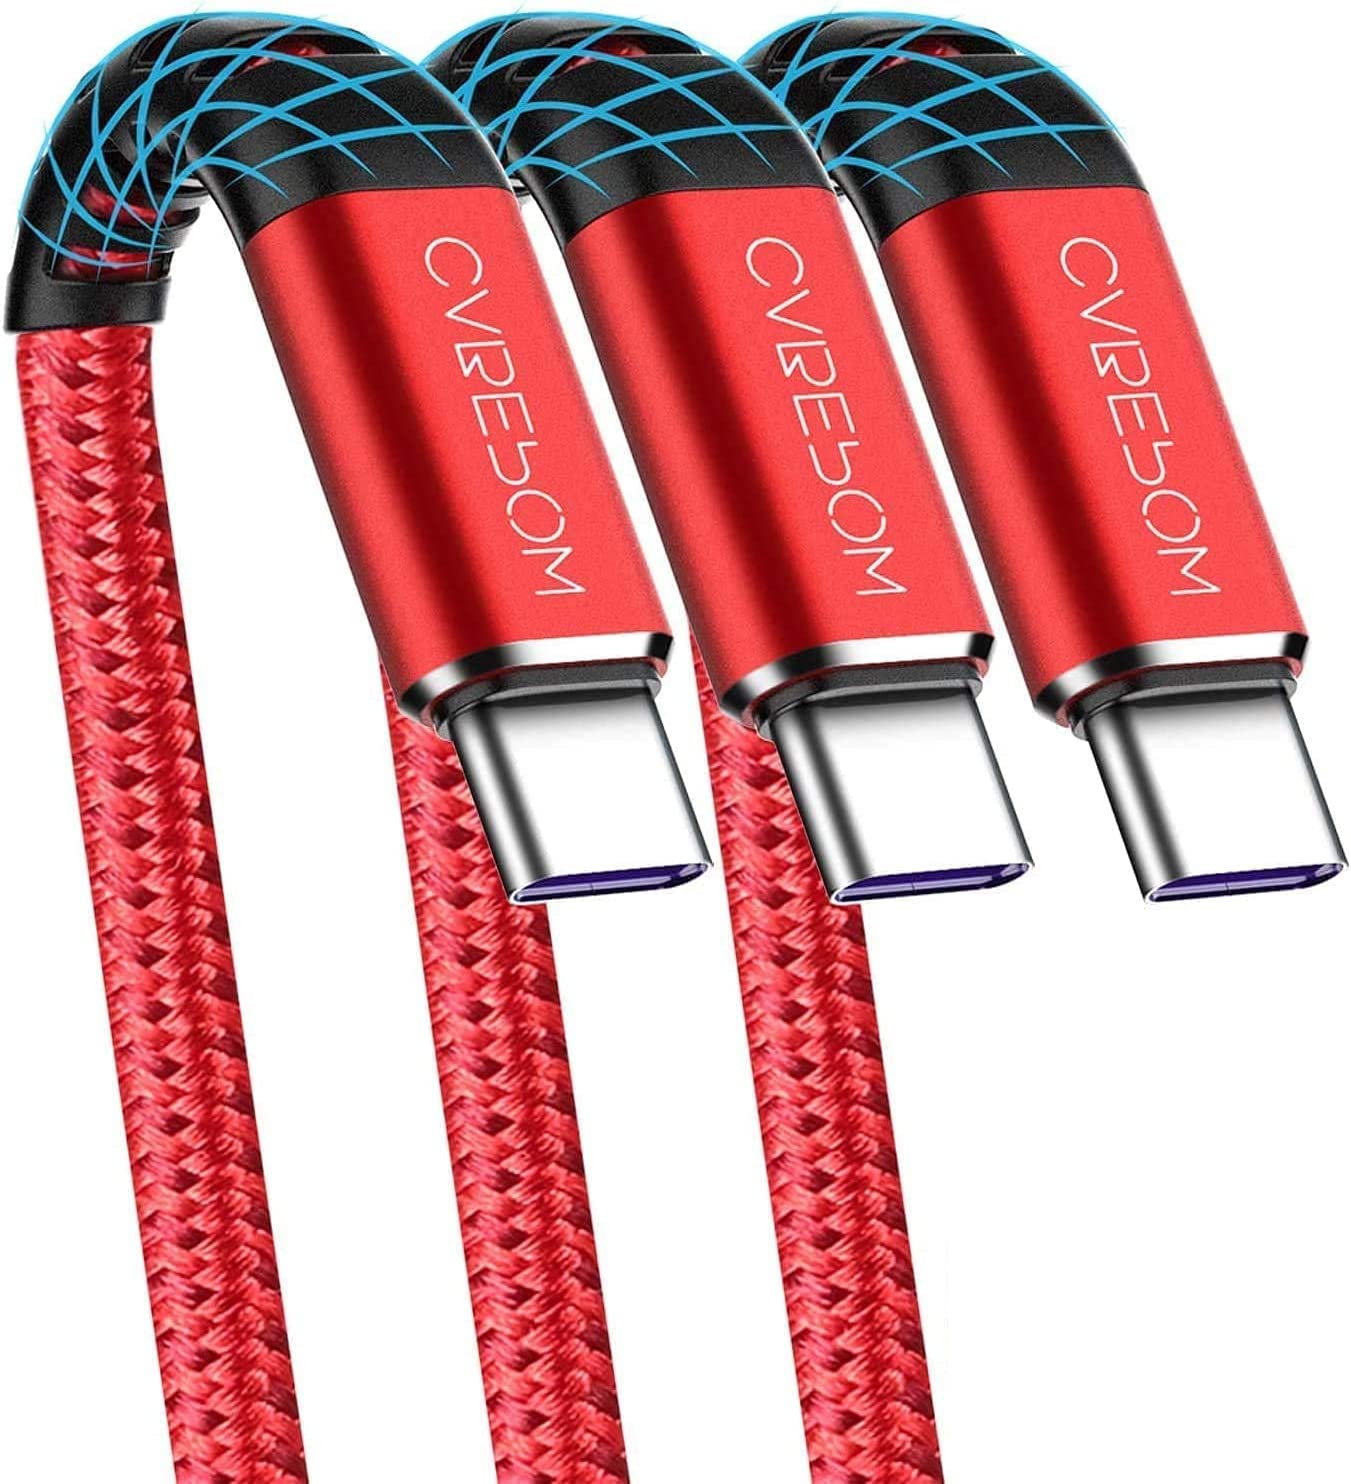 Cabepow USB A to Type C Cable, [3Pack] 6Ft Fast [...]